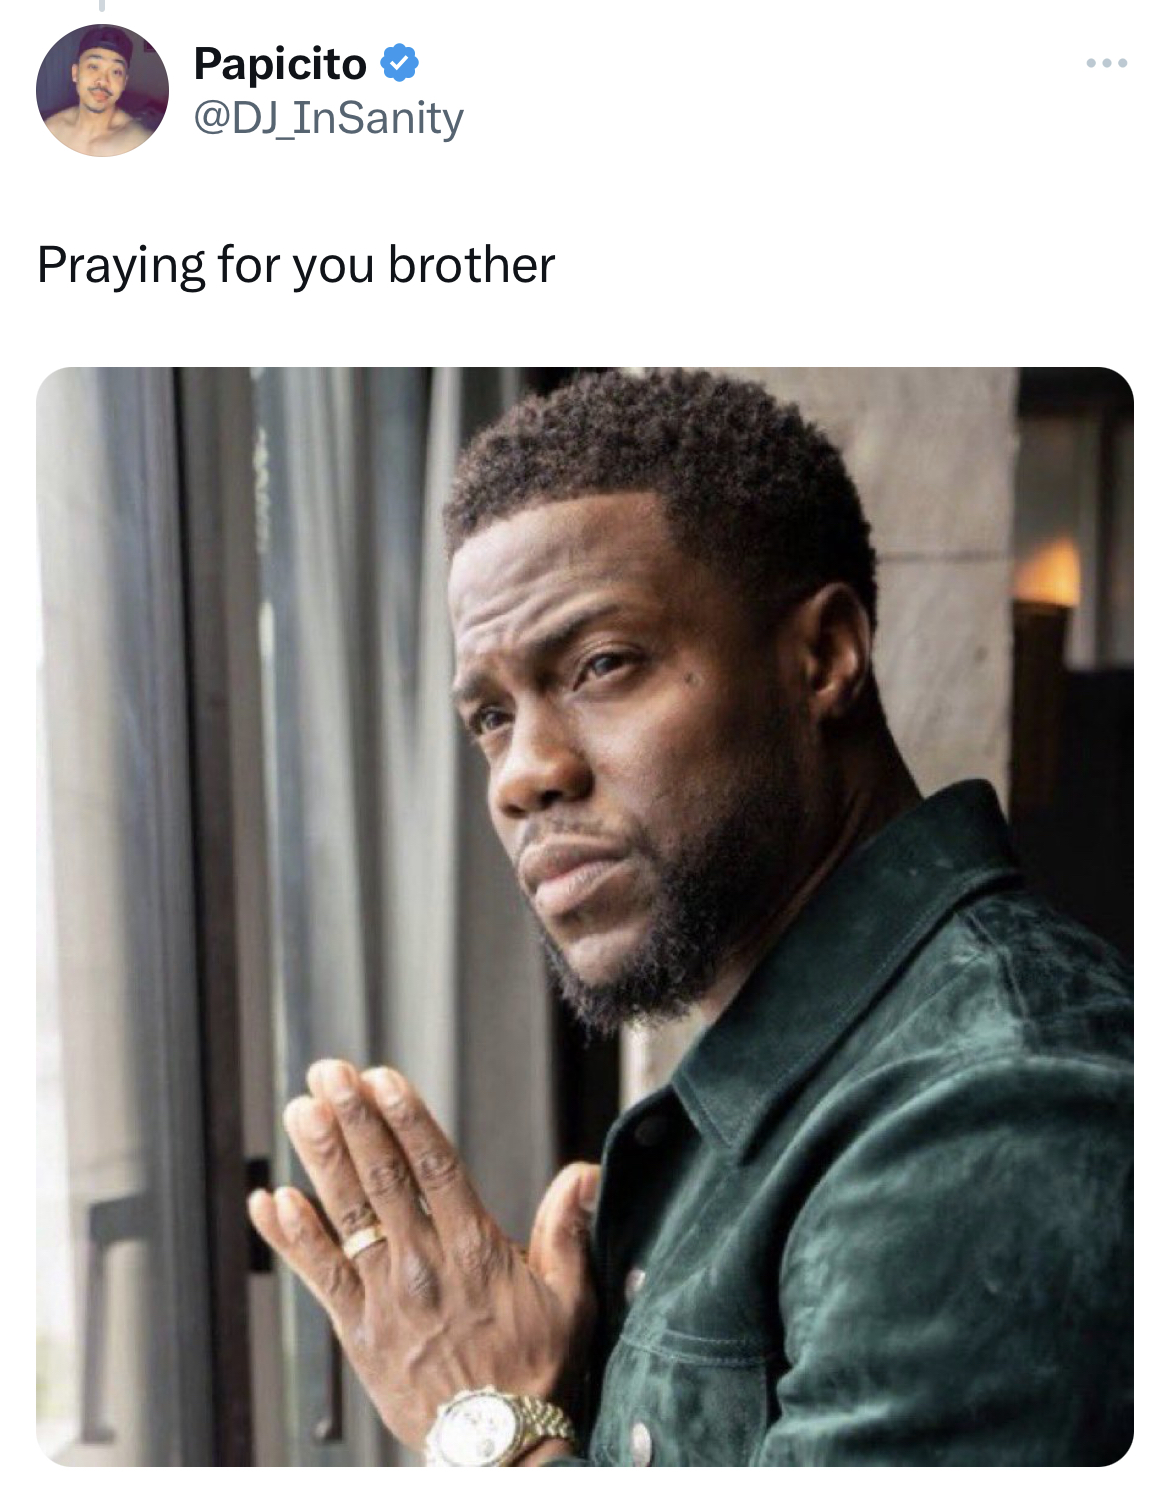 Kevin Hart trending memes - kevin hart beauty - Papicito Praying for you brother